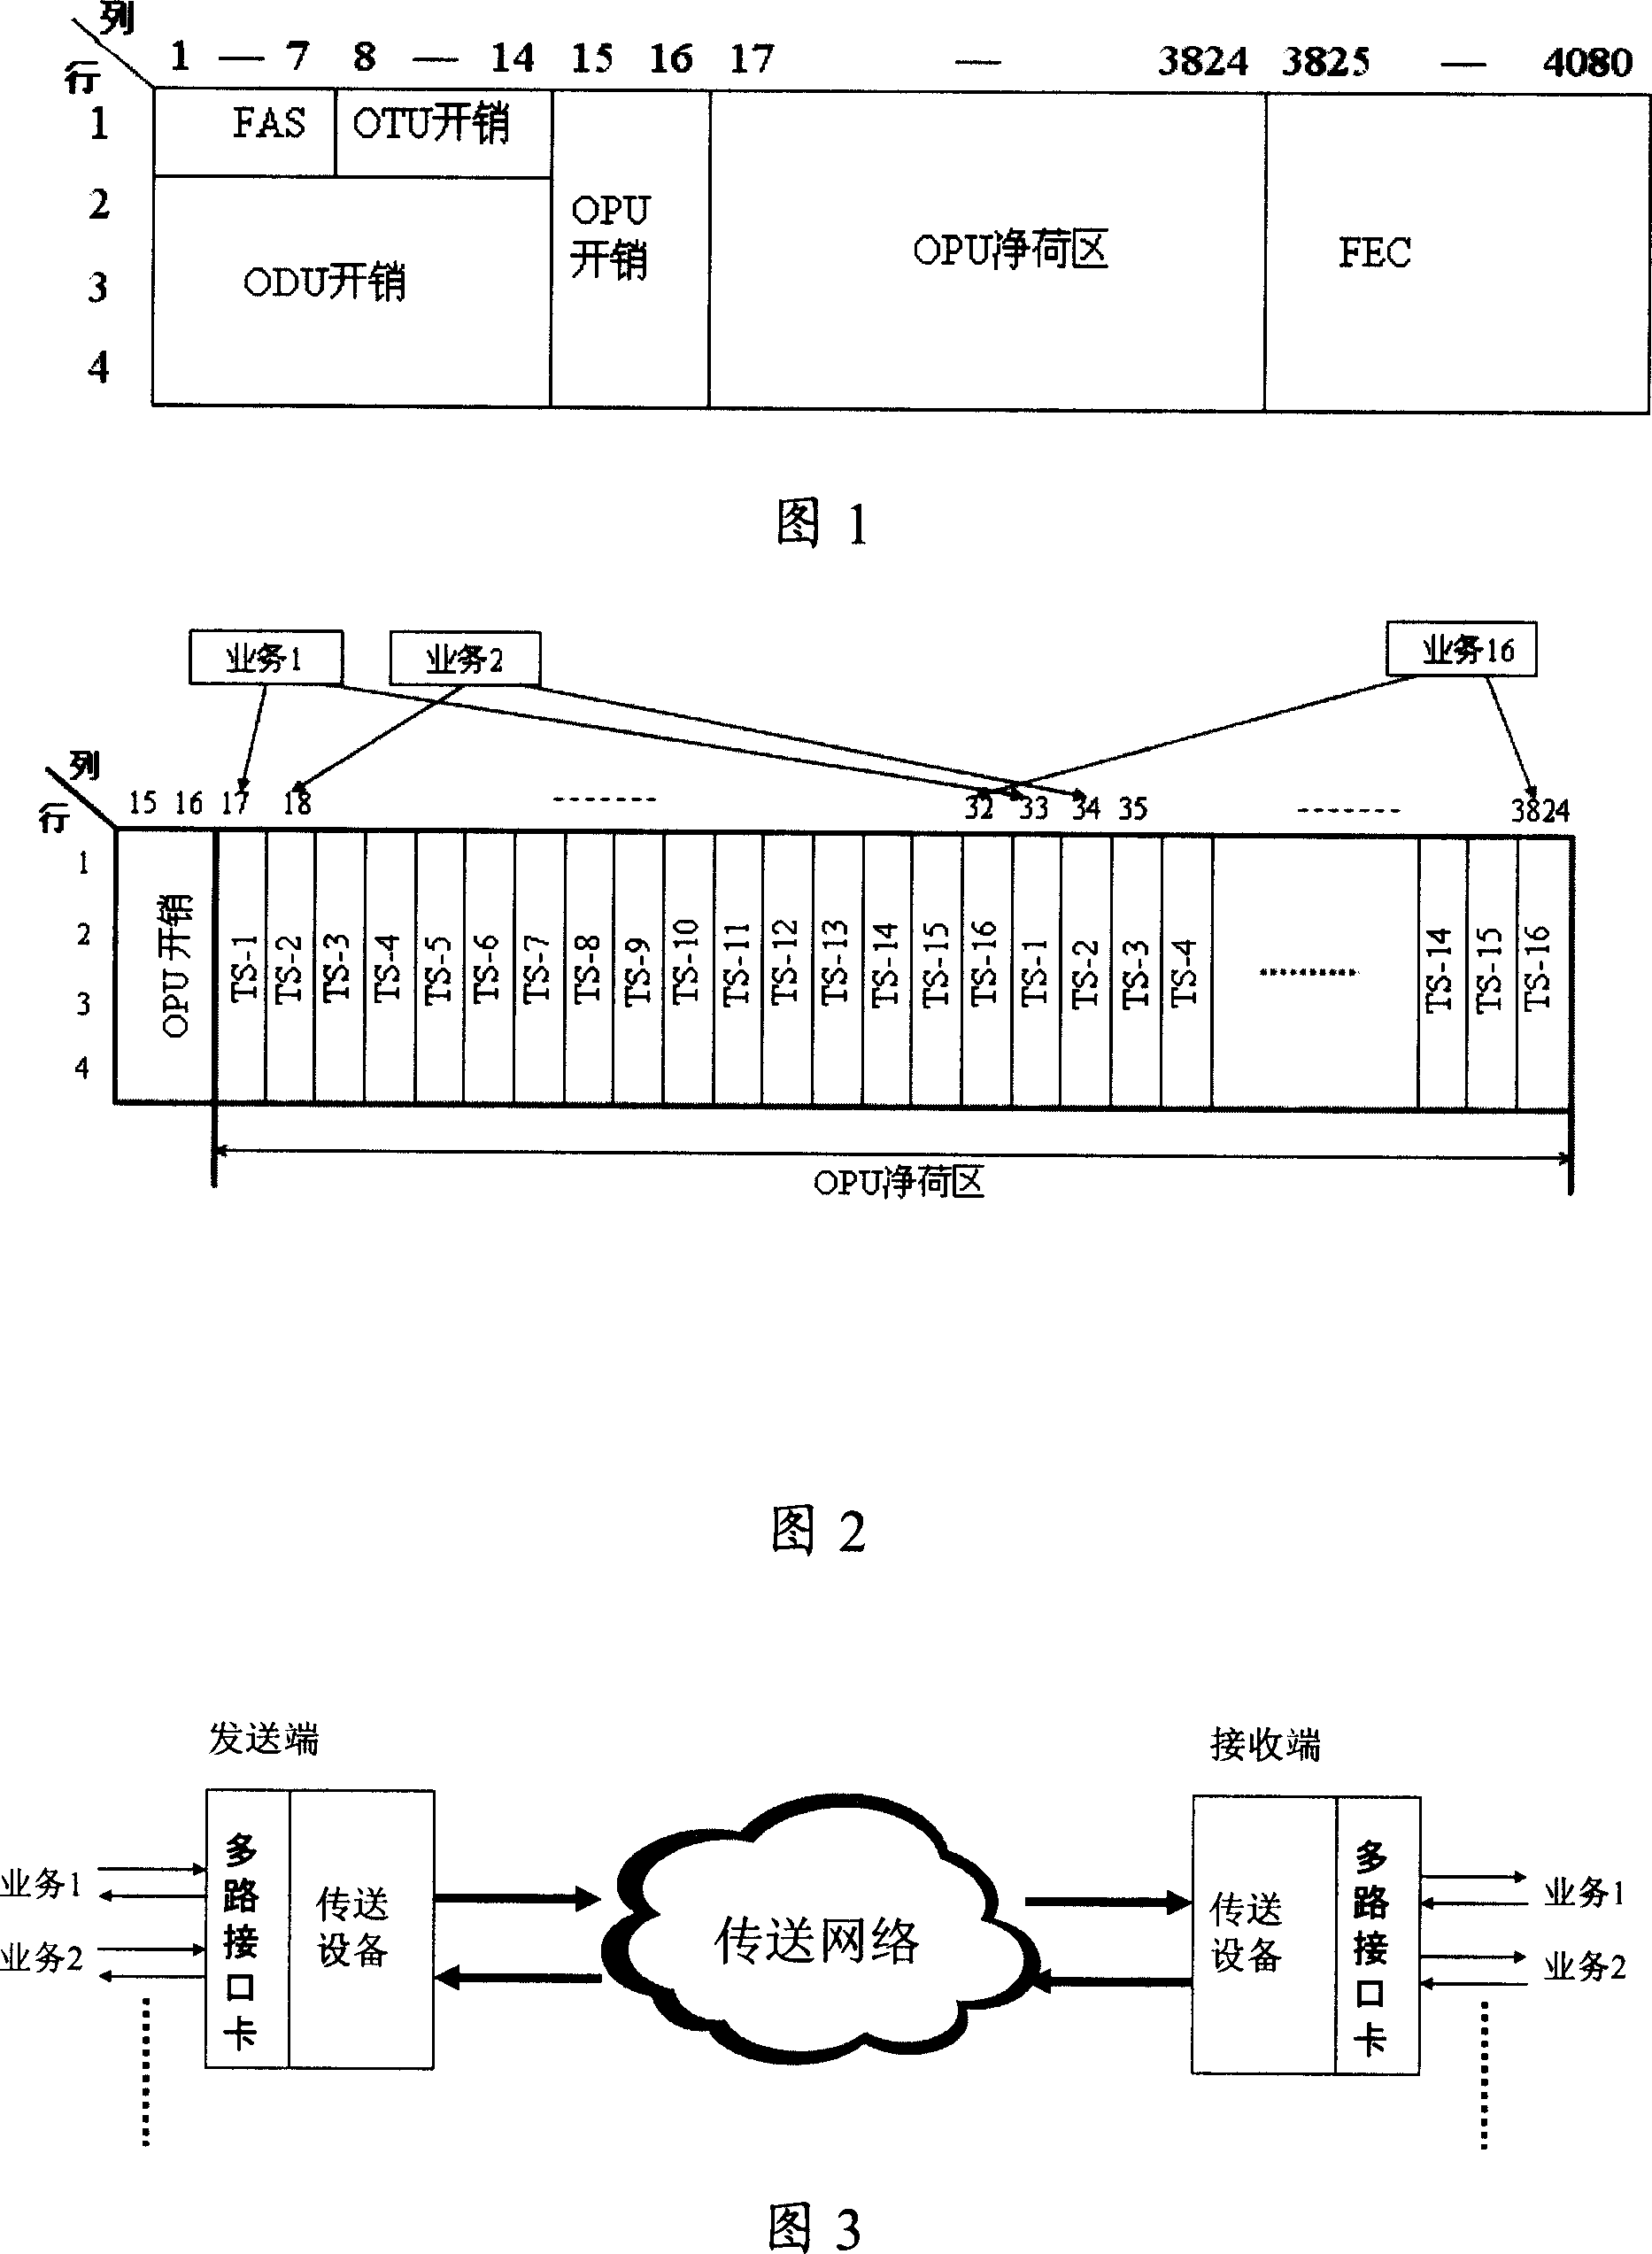 Method and apparatus for fixed velocity service transmission